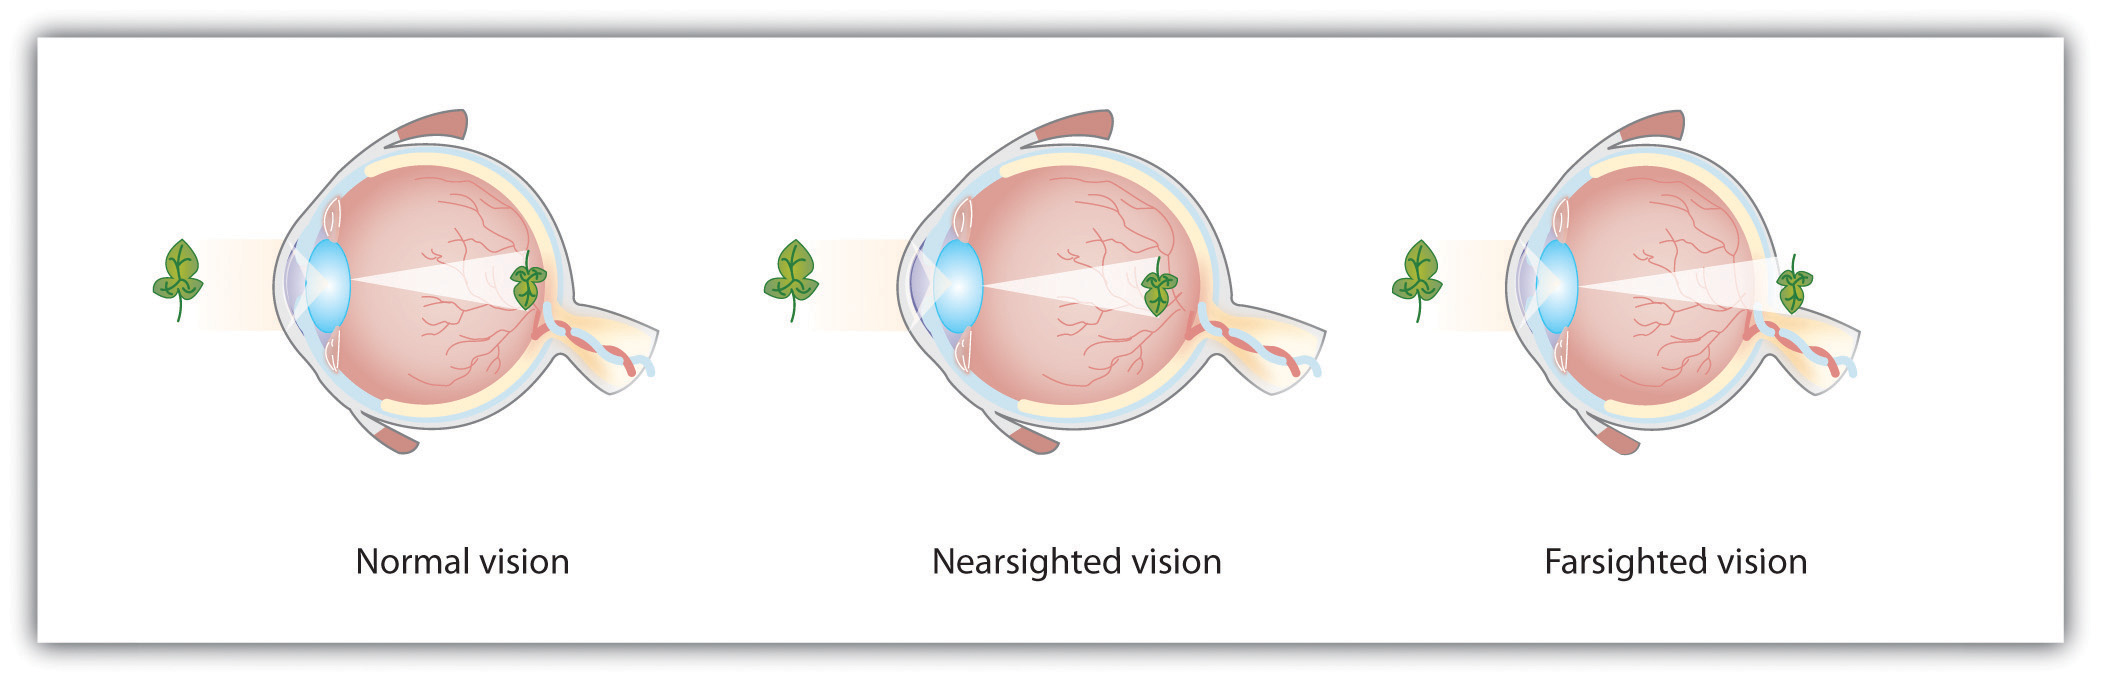 The Eye-Opening Neuroscience Behind Your Vision